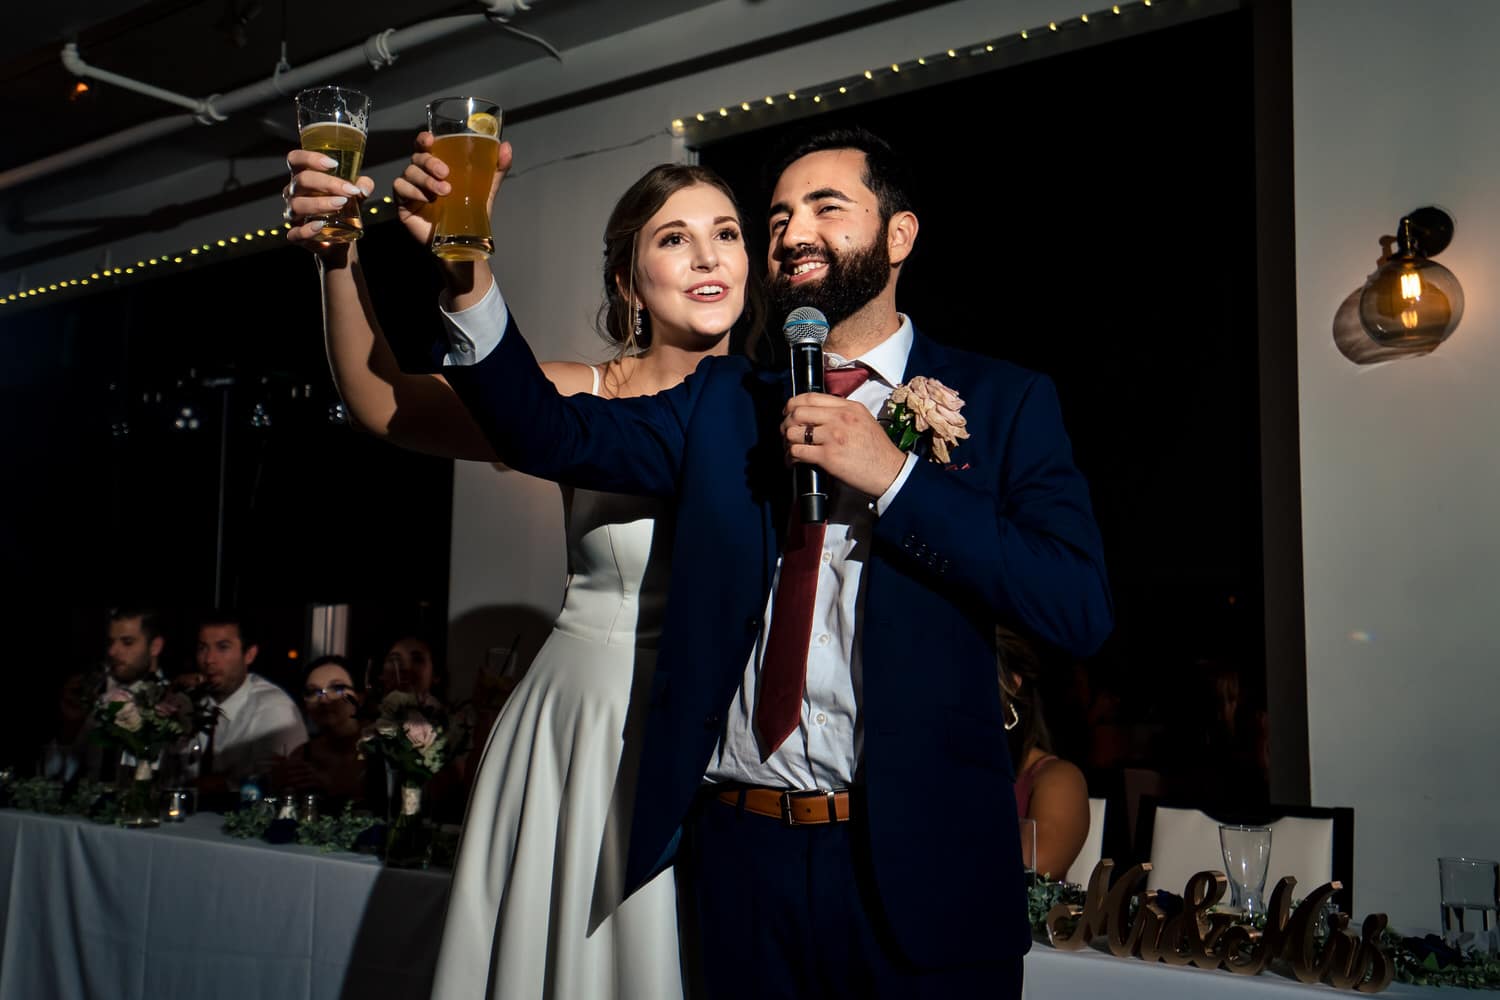 A colorful, candid picture of a bride and groom making a toast to their wedding guests, raising their beers in celebration during a classic wedding reception at The Grand Street Cafe in Kansas City. 